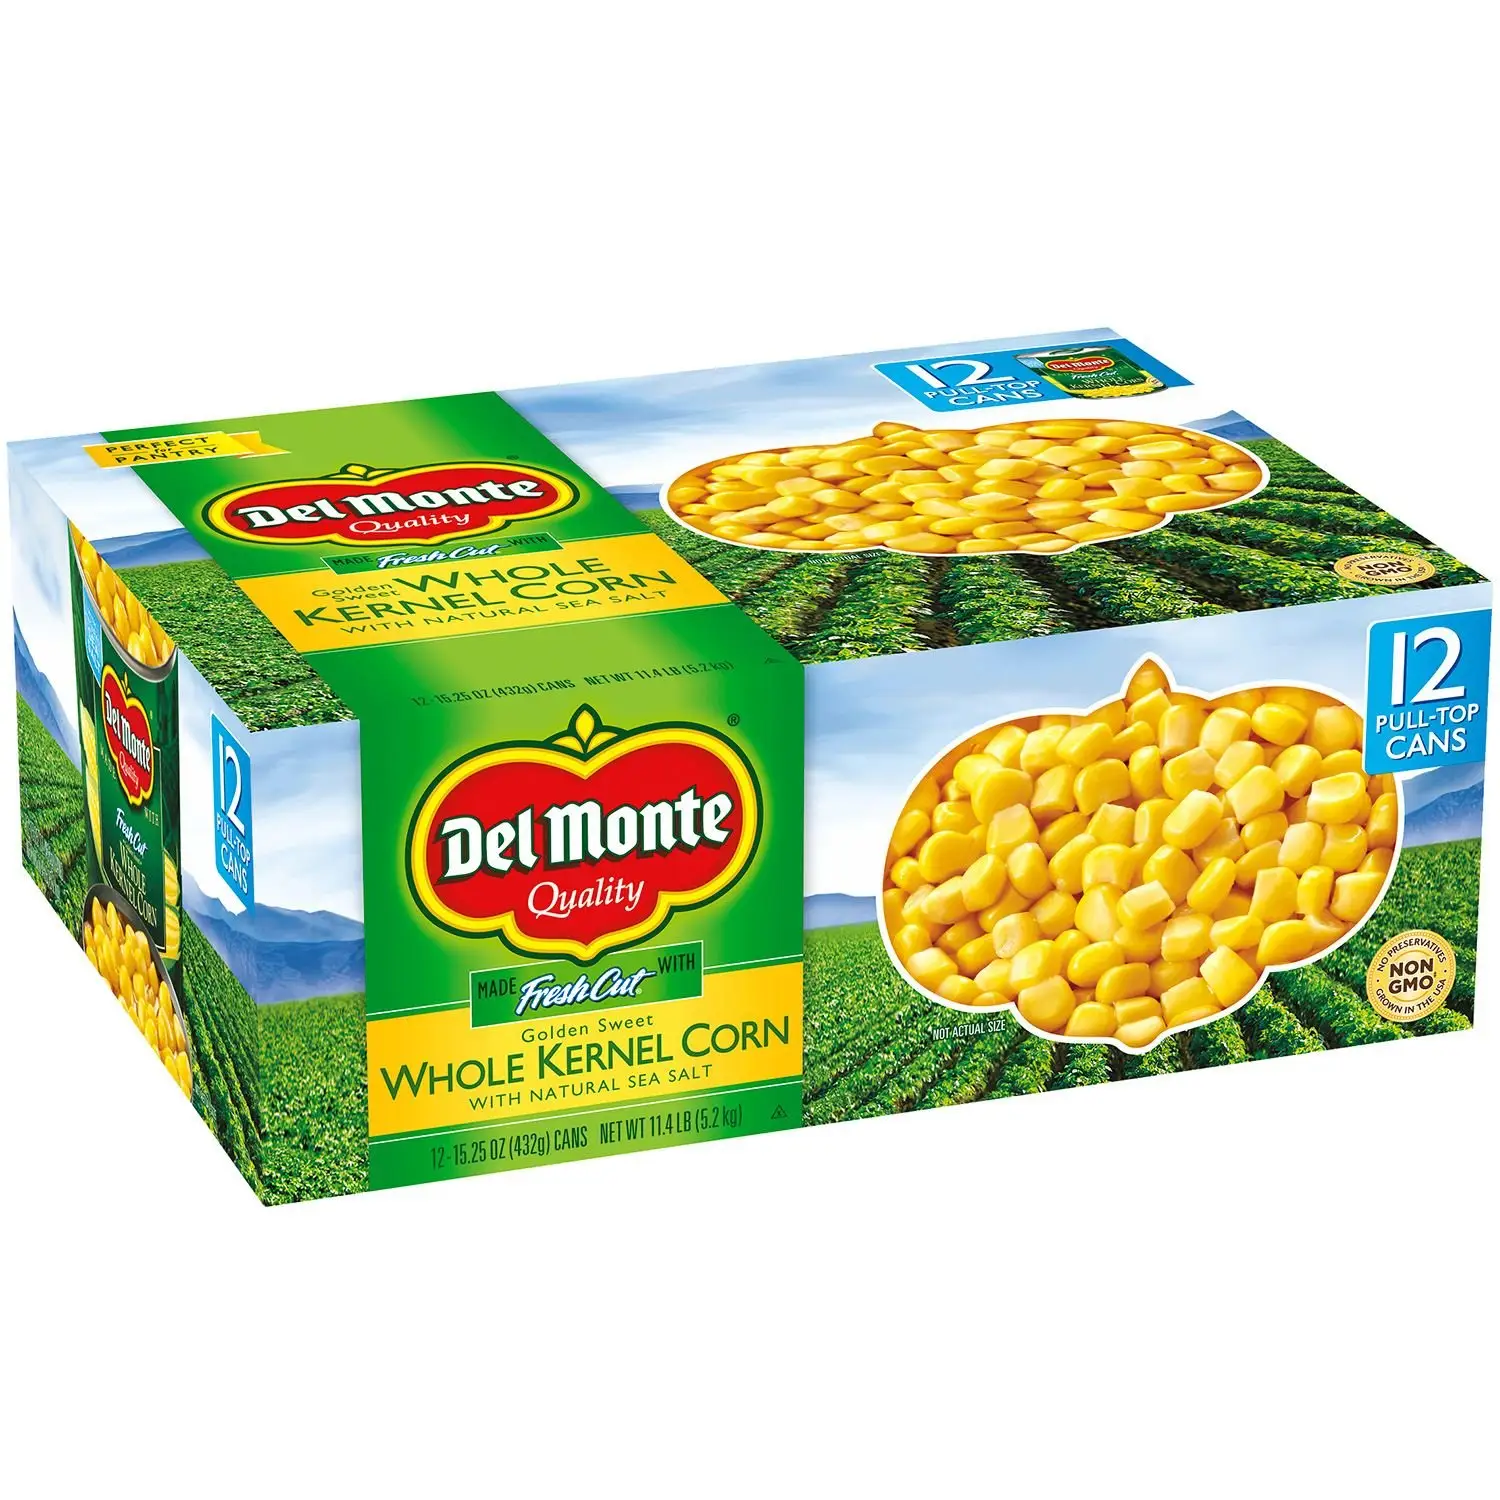 Del-Monte Canned Fresh Cut Golden Sweet Whole Kernel Corn 15.25-Ounce (Pack of 12)